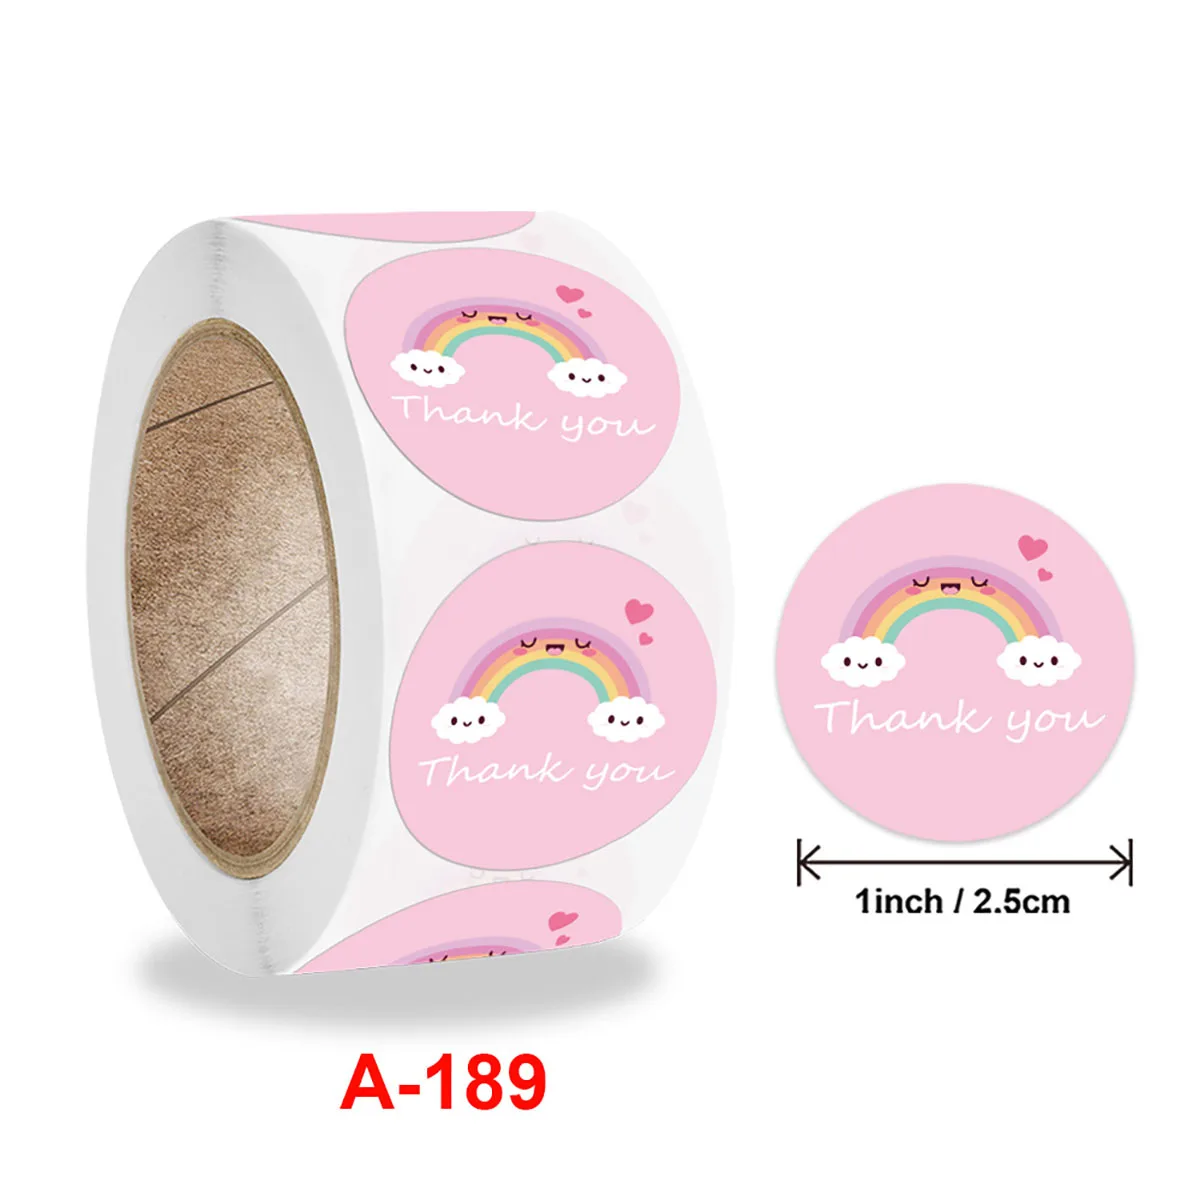 

500Pcs 1Inch Thank You Rainbow Cartoon Cute Pink Stickers For Gift Present Package Label Envelope Sealing Wrapping Supplies